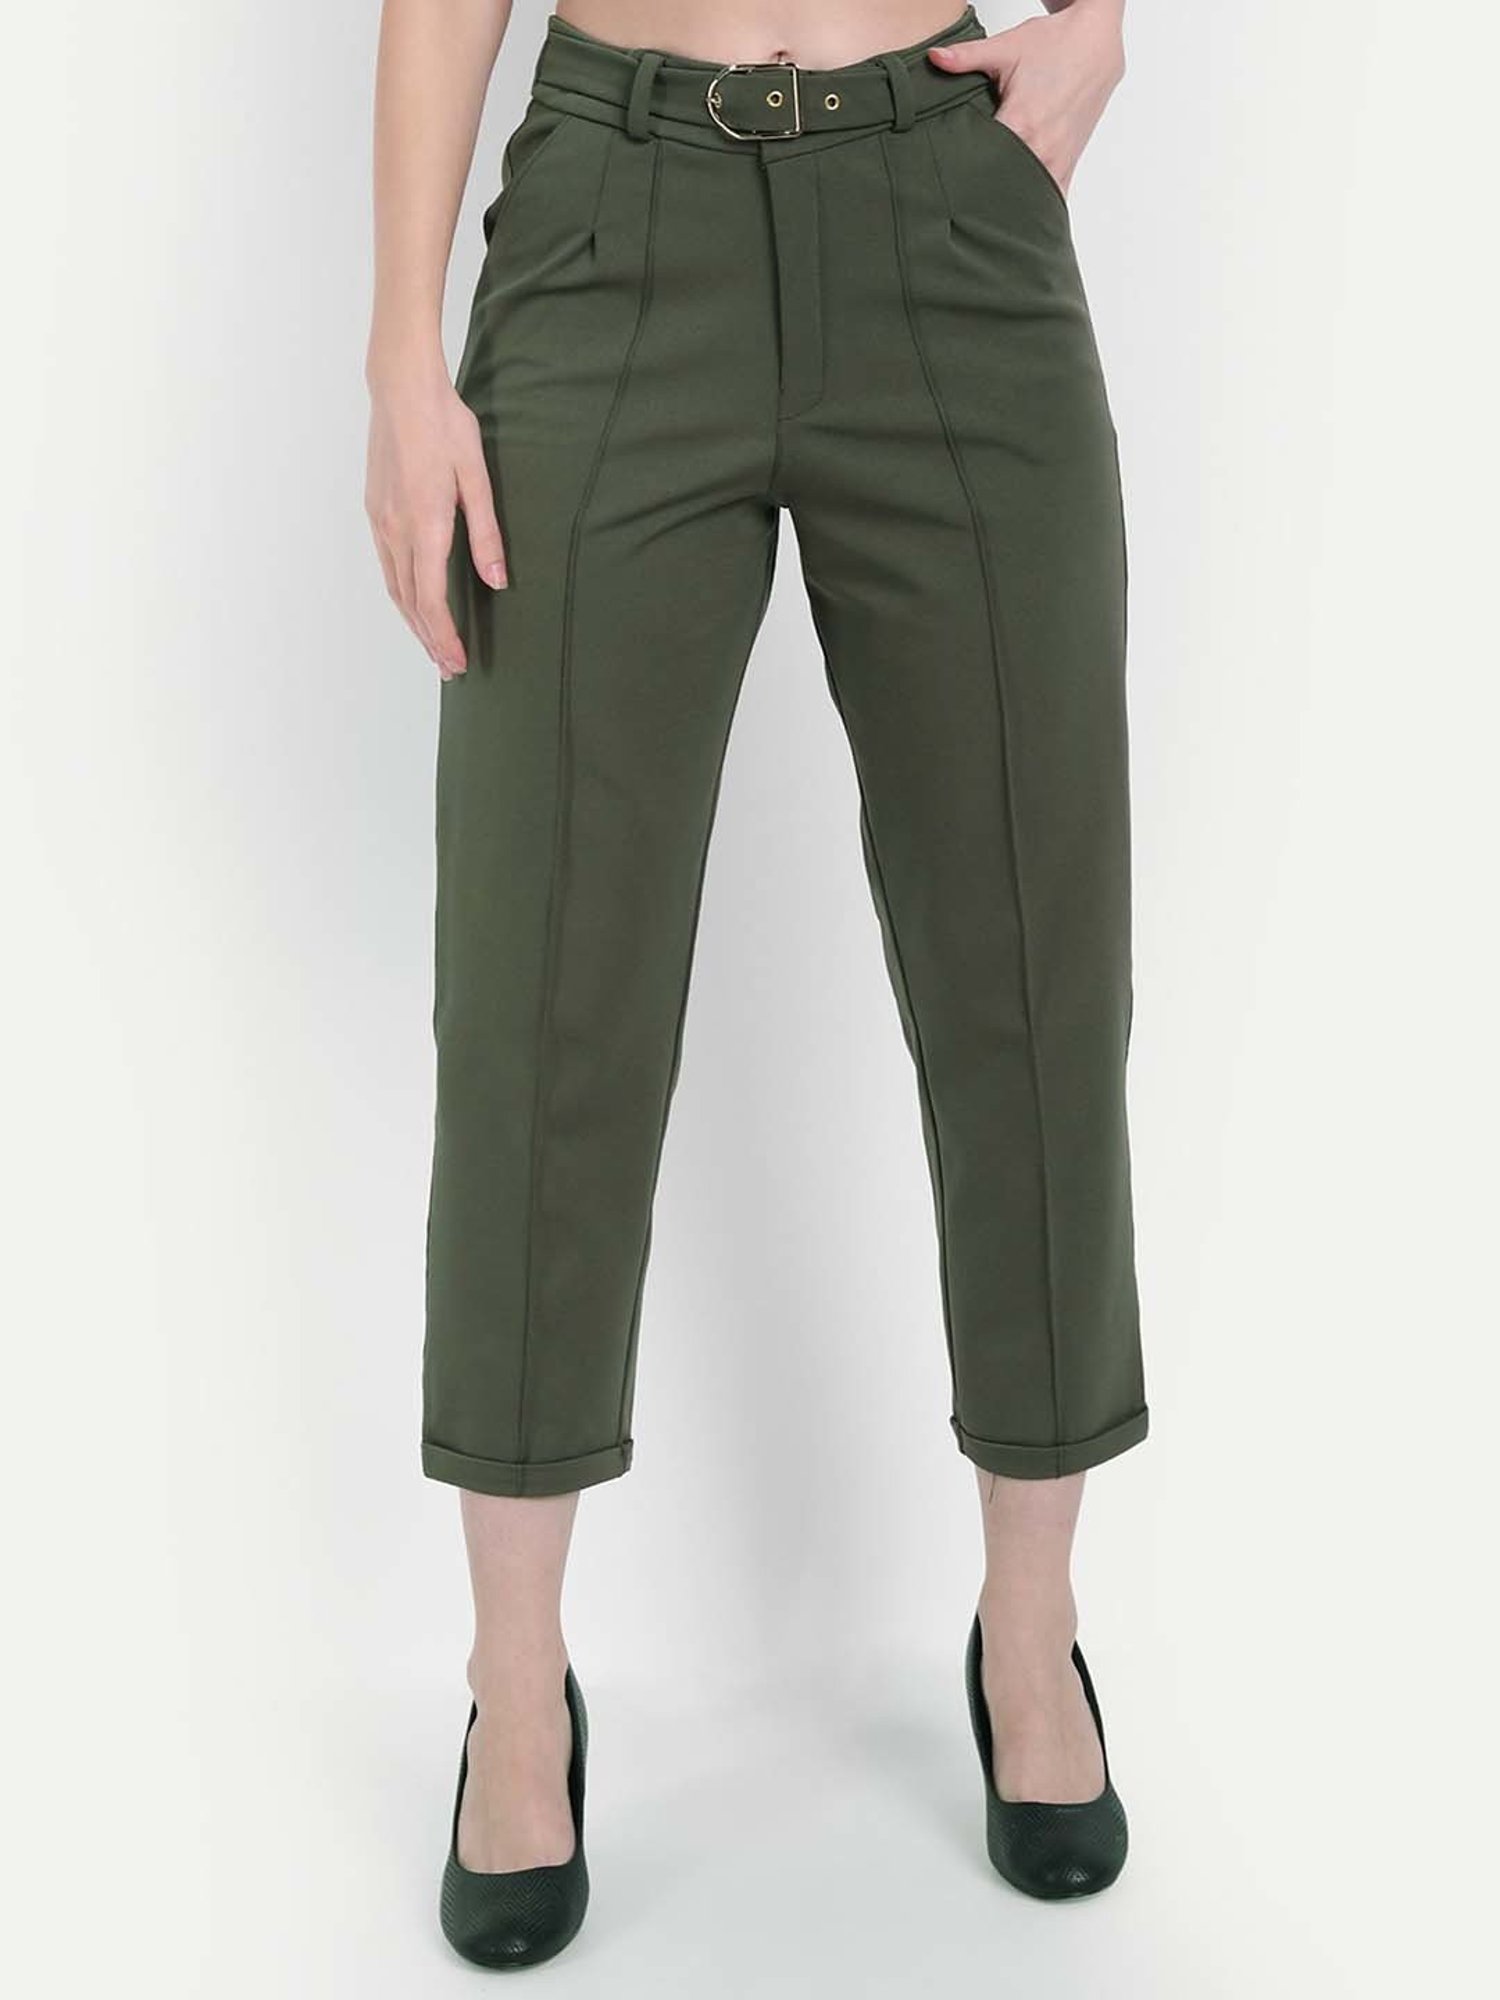 F For Fashion Latest designer stylish stretchable casual look Womens Tie  Knot Pant ARMY GREEN Womens